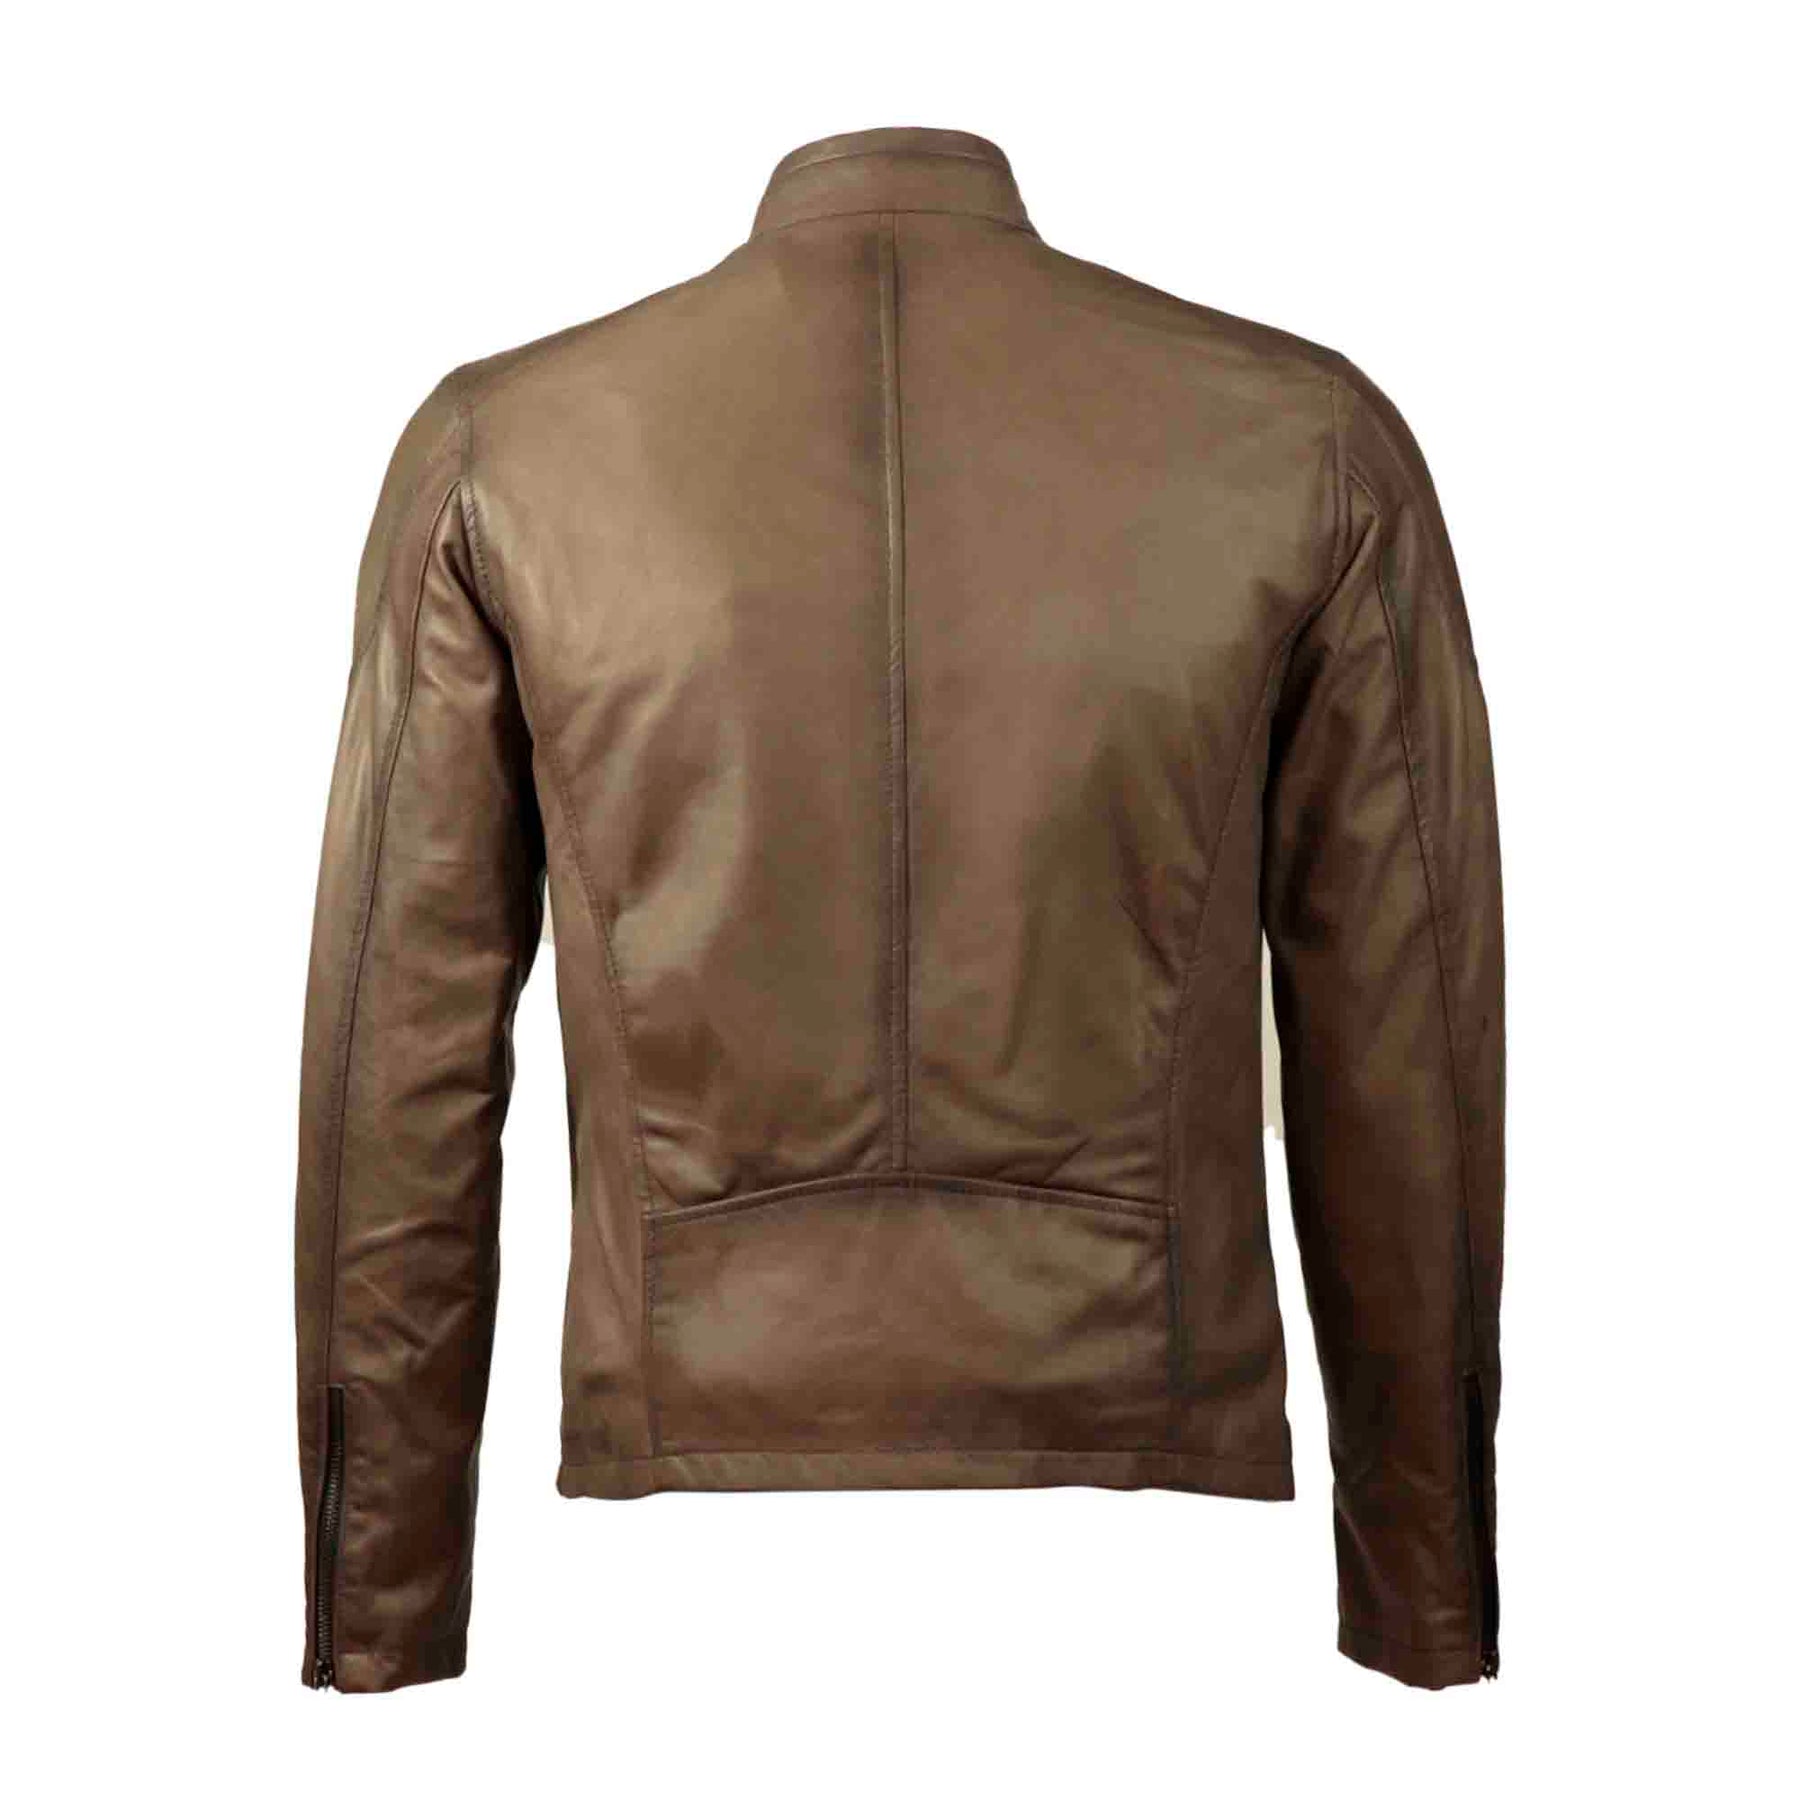 Sports jacket in brown vegetable tanned leather